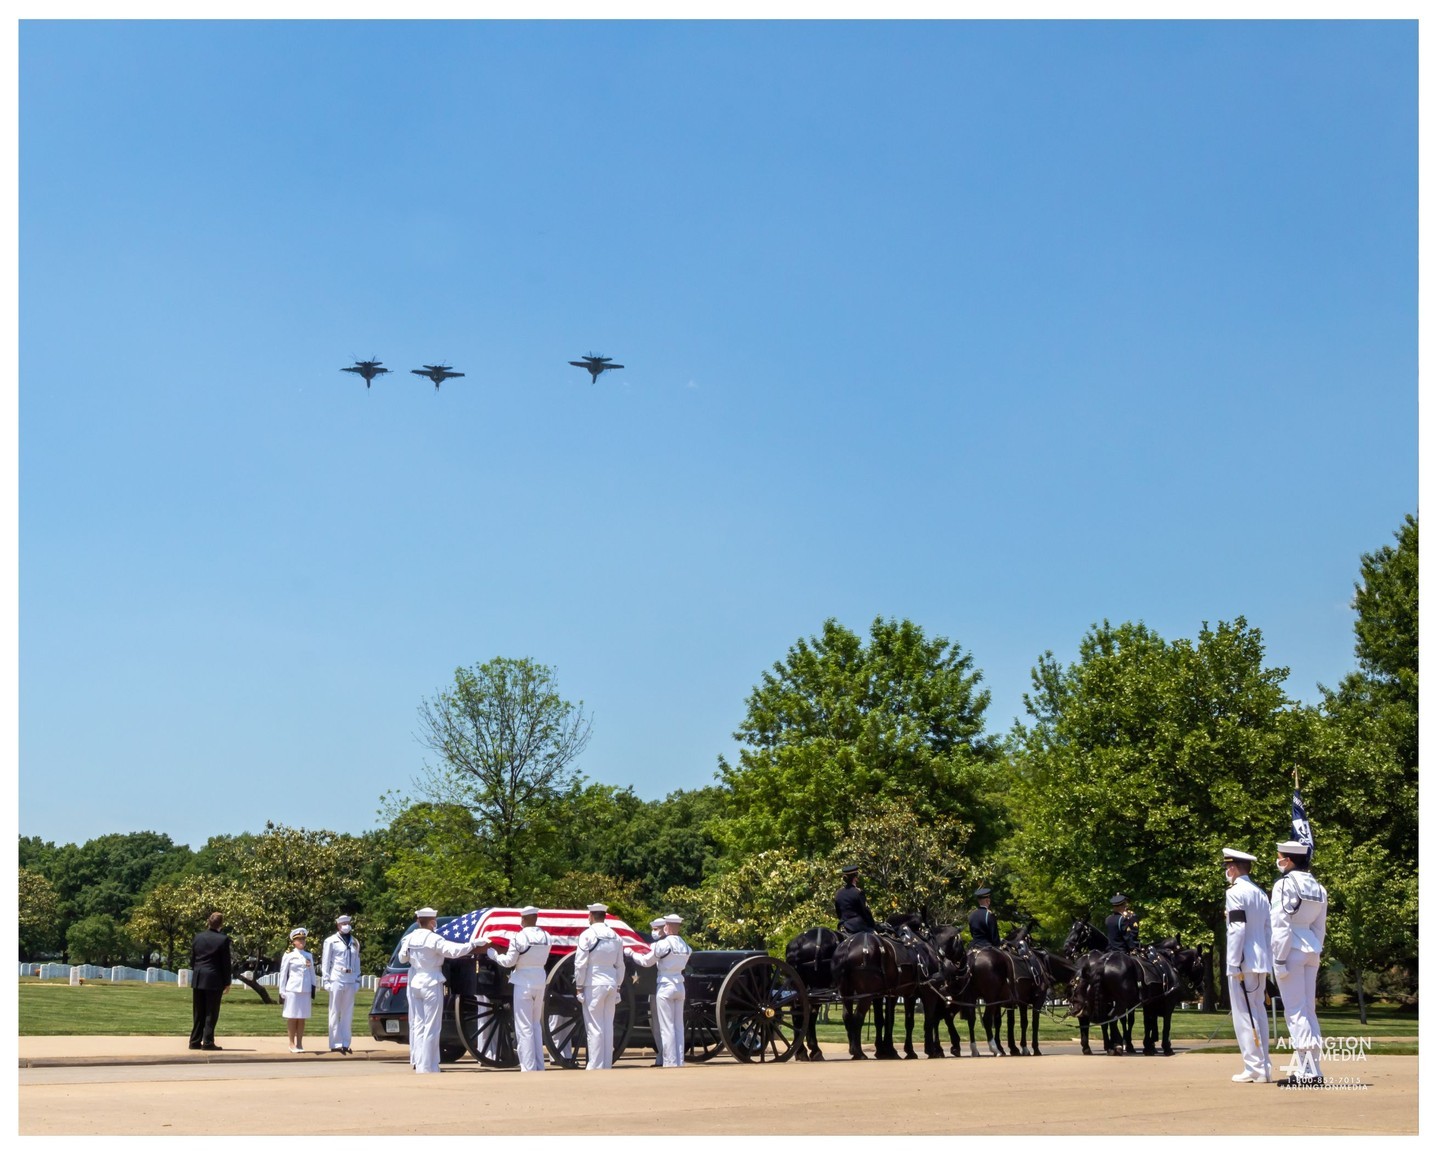 A flyover during a US Navy full honors service at Marshall Transfer as captured by the @arlingtonmedia team.